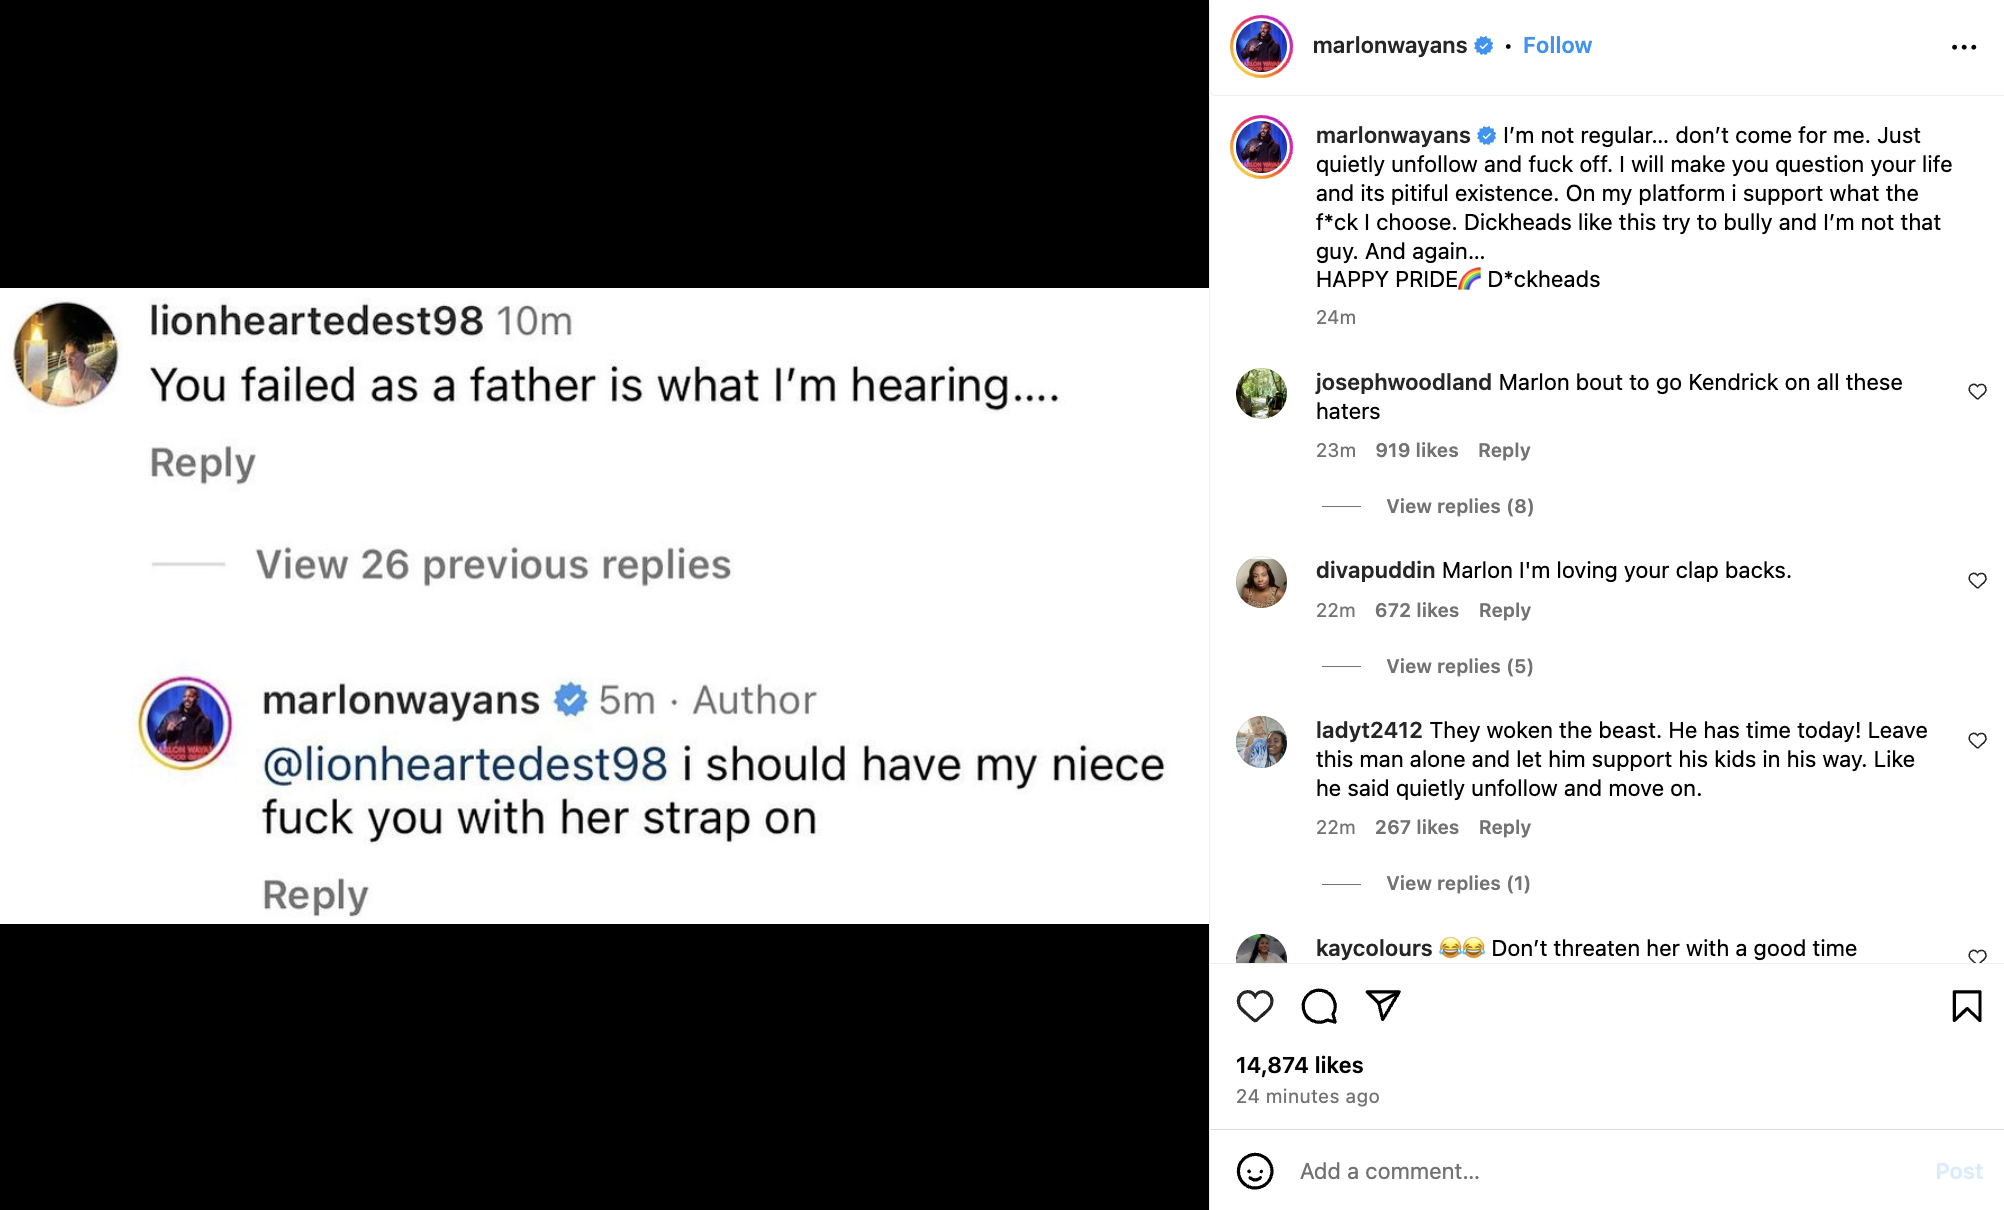 Marlon Wayans responds to an Instagram comment from user lionheartedest98 regarding his fatherhood. The exchange is heated and controversial